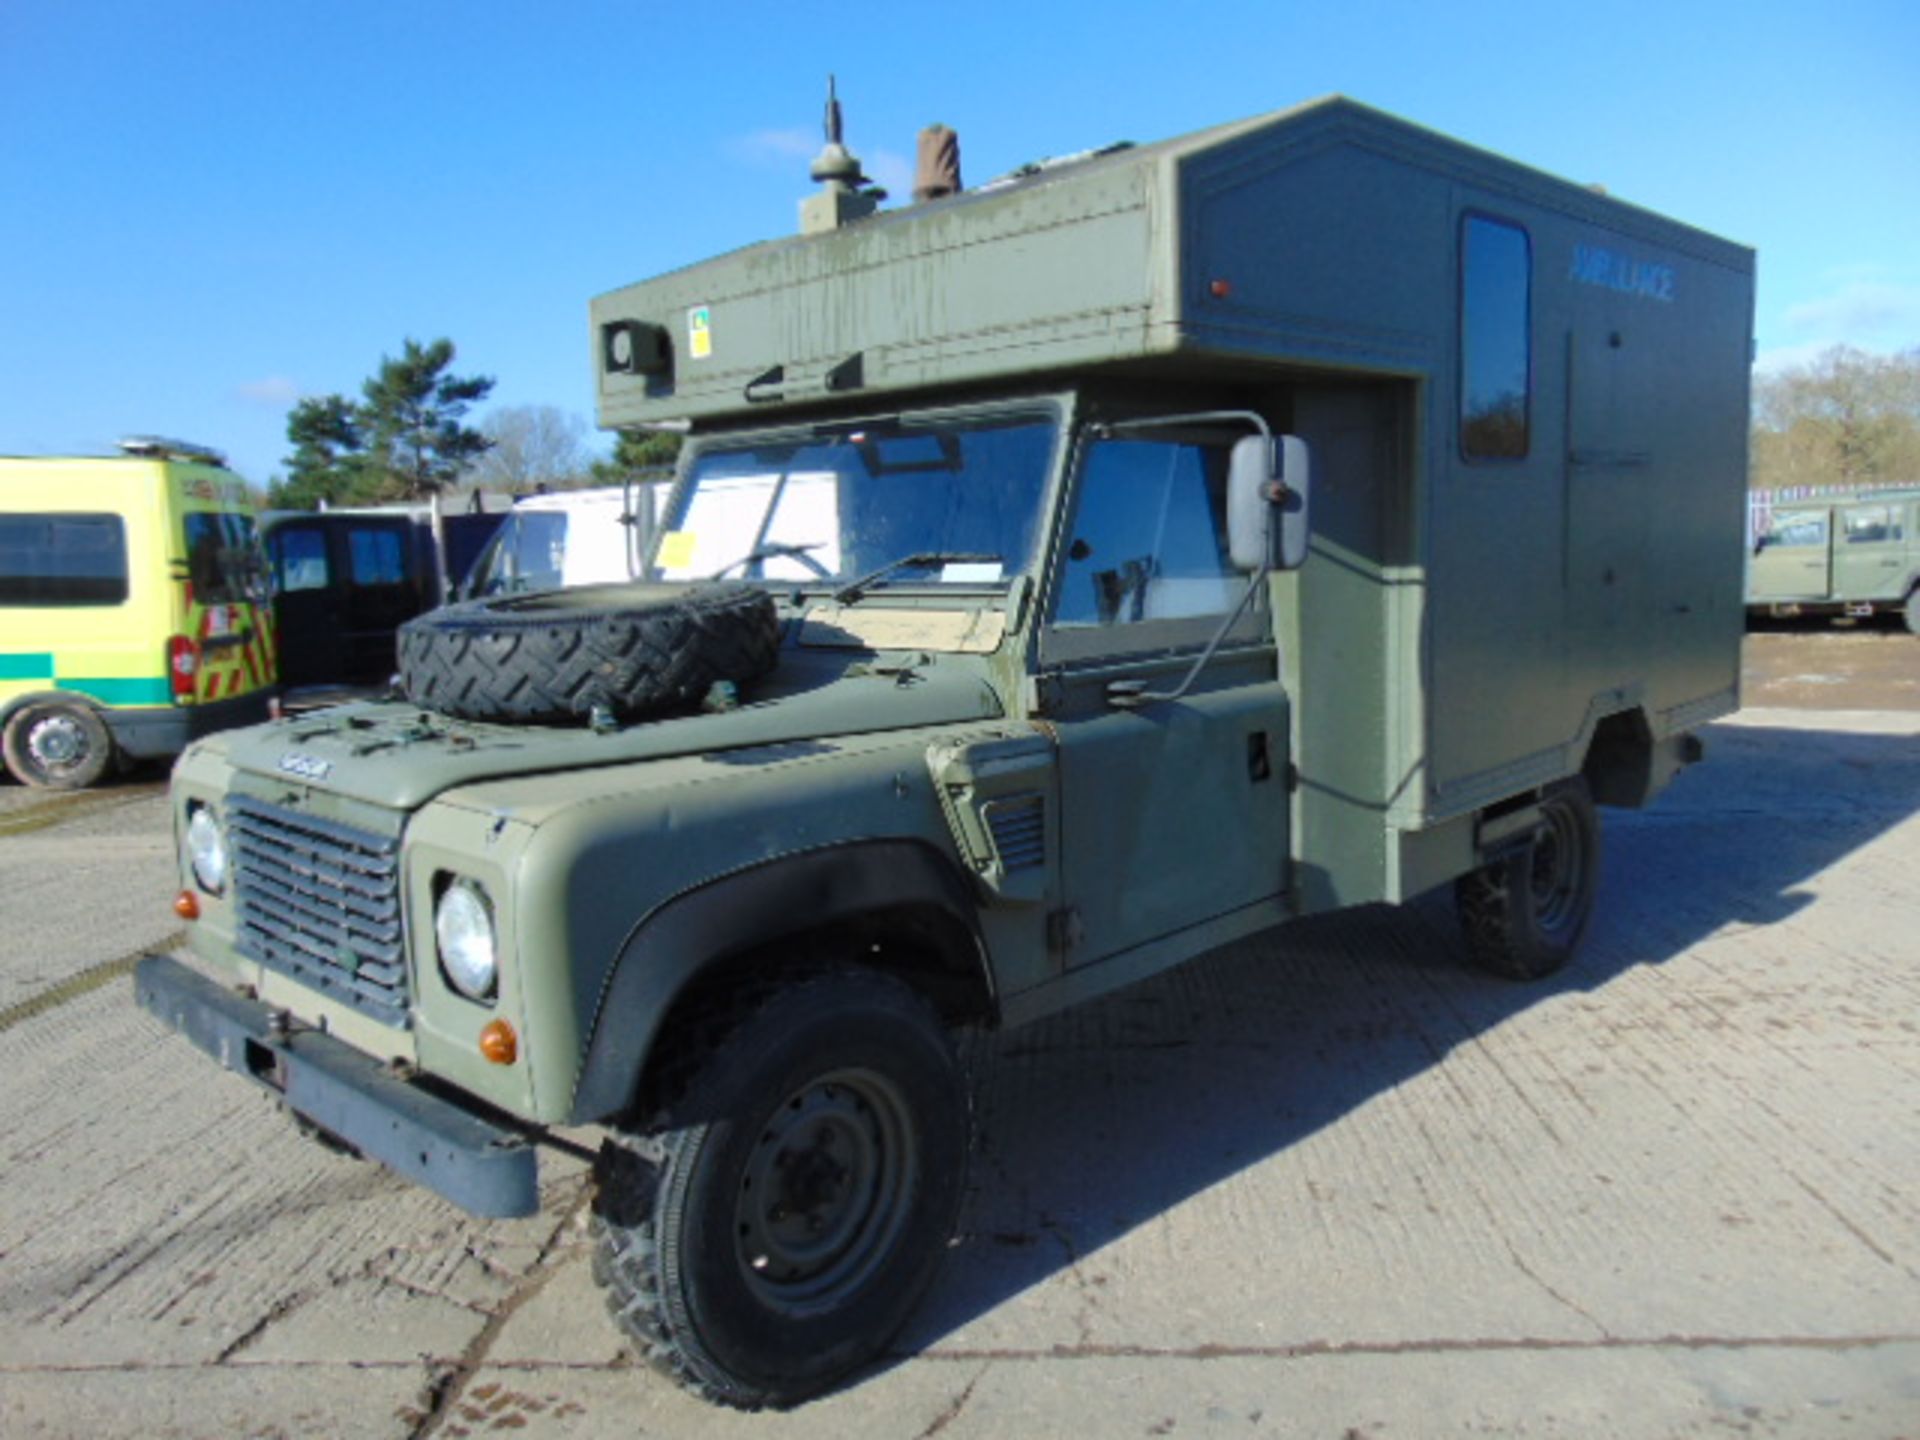 Military Specification Land Rover Wolf 130 ambulance - Image 3 of 15